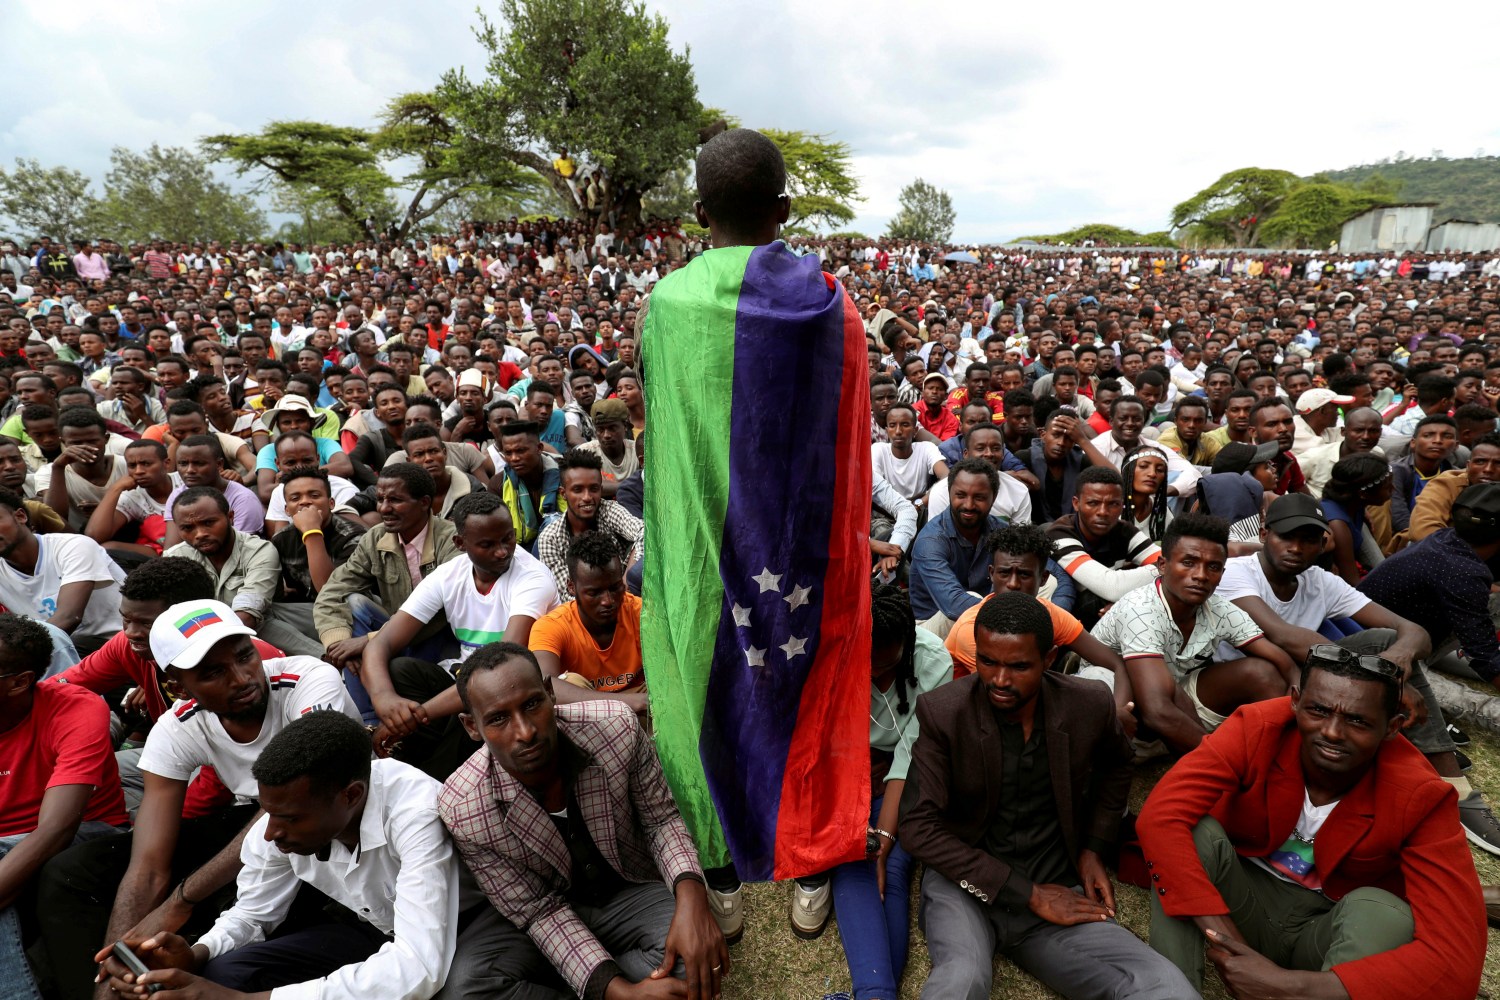 A Sidama youth leader carrying a flag addresses people as they gather for a meeting to declare their own region in Hawassa, Ethiopia July, 17, 2019. REUTERS/Tiksa Negeri     TPX IMAGES OF THE DAY - RC1DA87ABD10